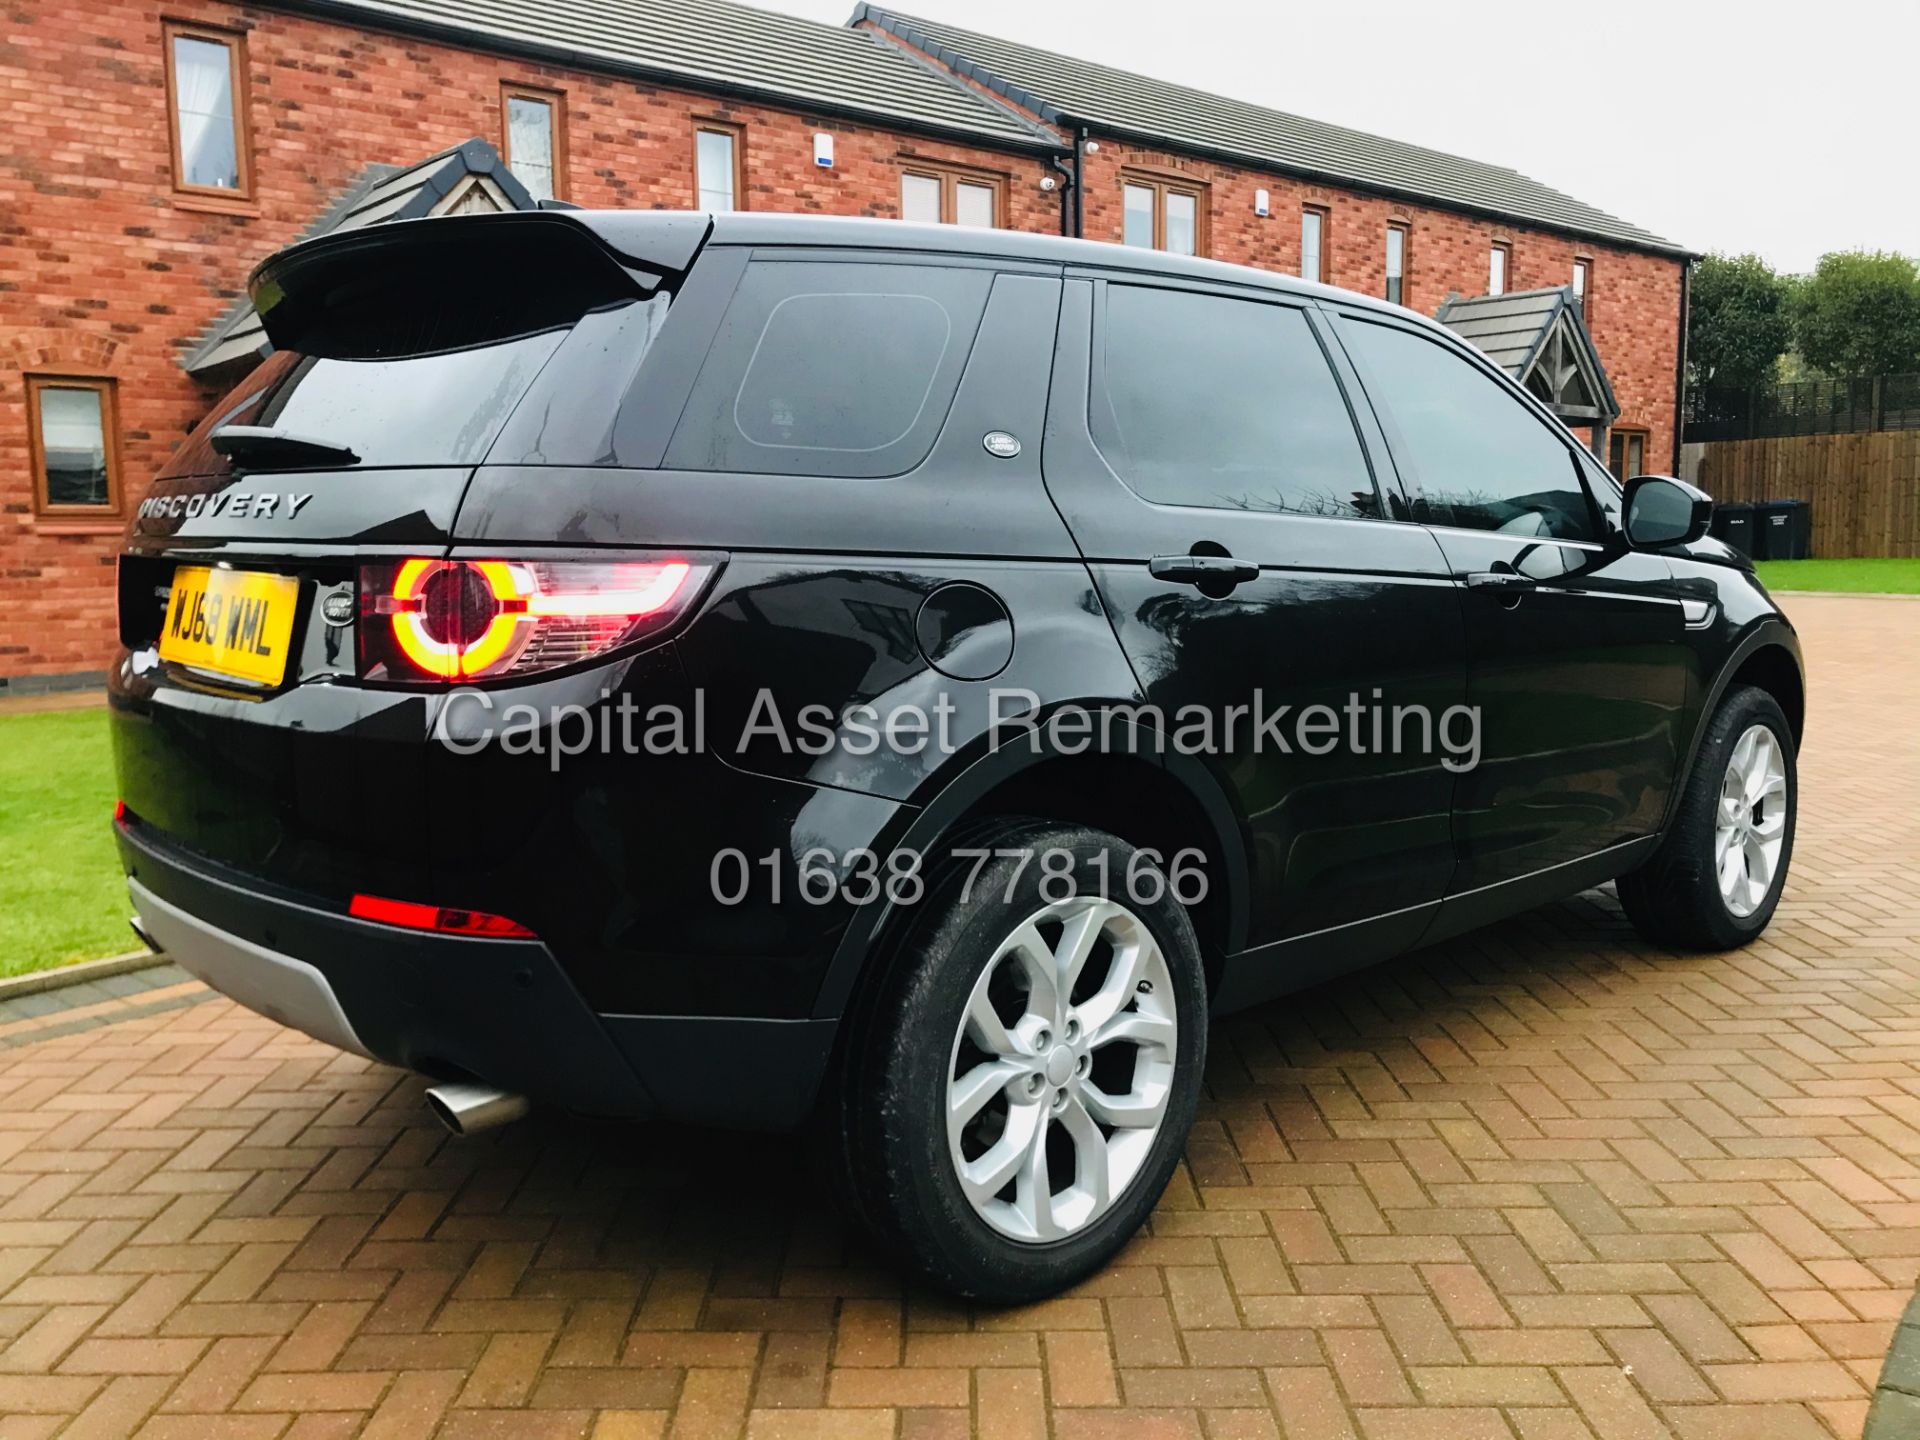 ON SALE LAND ROVER DISCOVERY SPORT "HSE" AUTO 7 SEATER (2019 MODEL) - SAT NAV -LEATHER *PAN ROOF* - Image 11 of 35